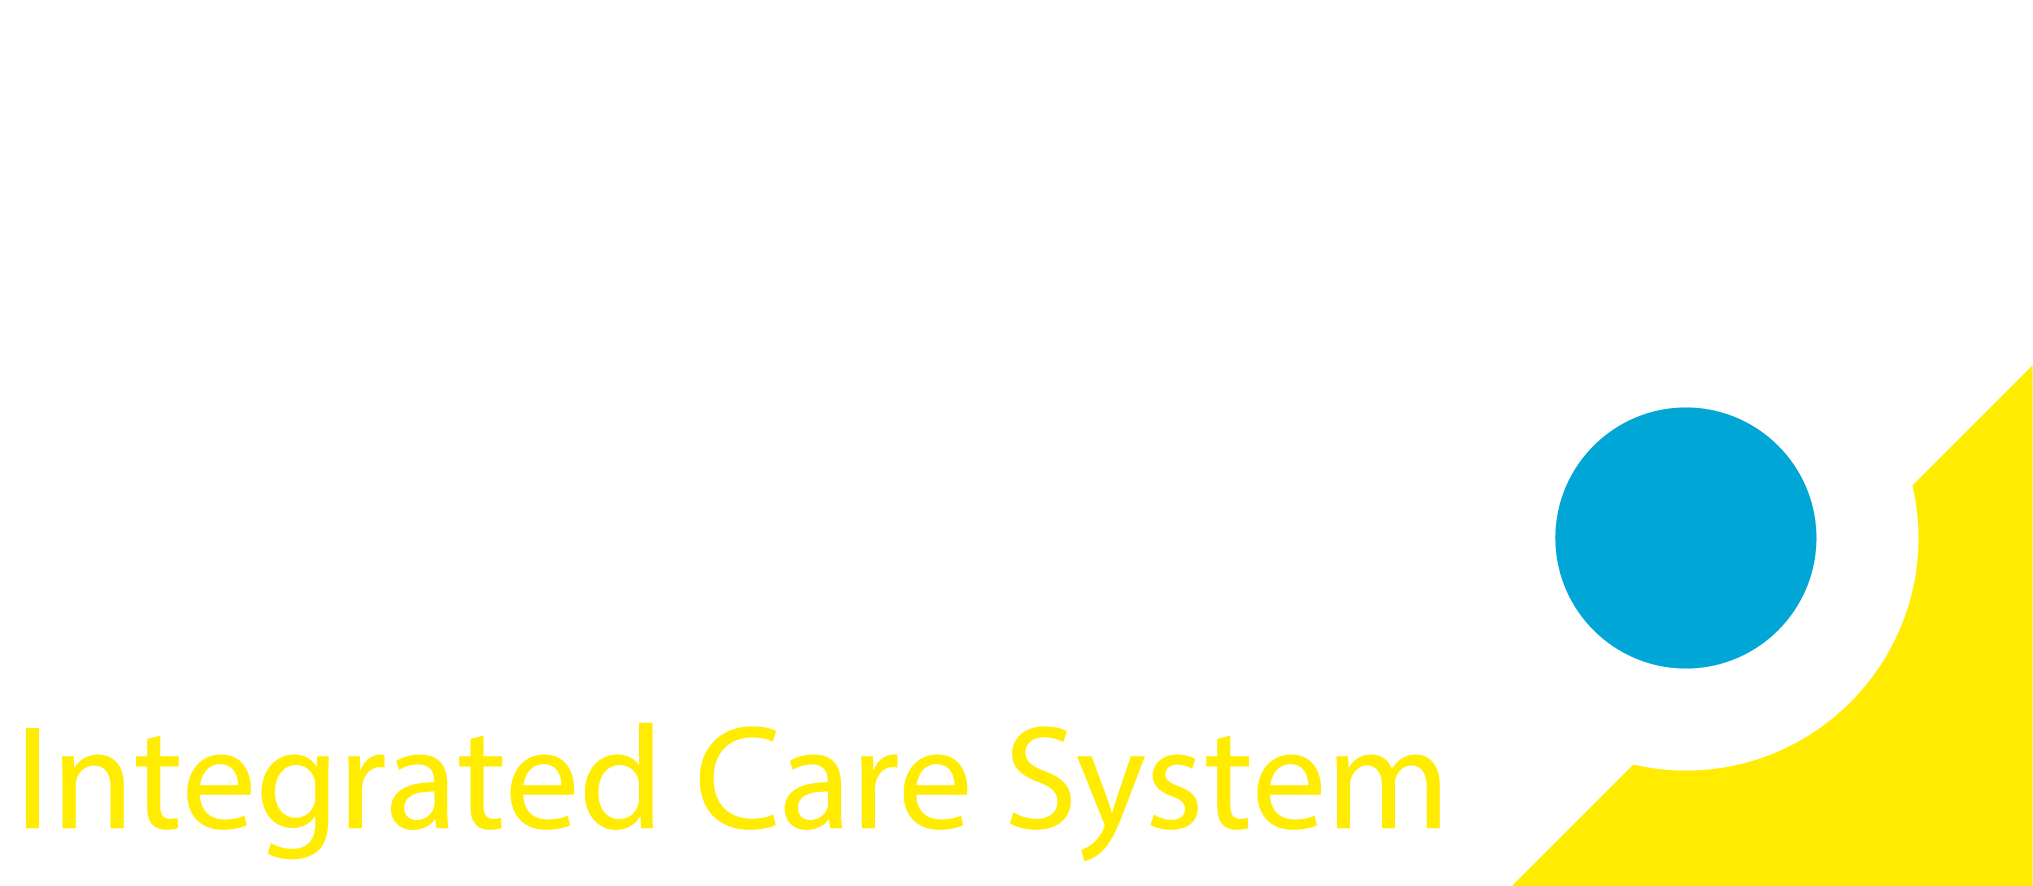 South East London Integrated Care System Logo